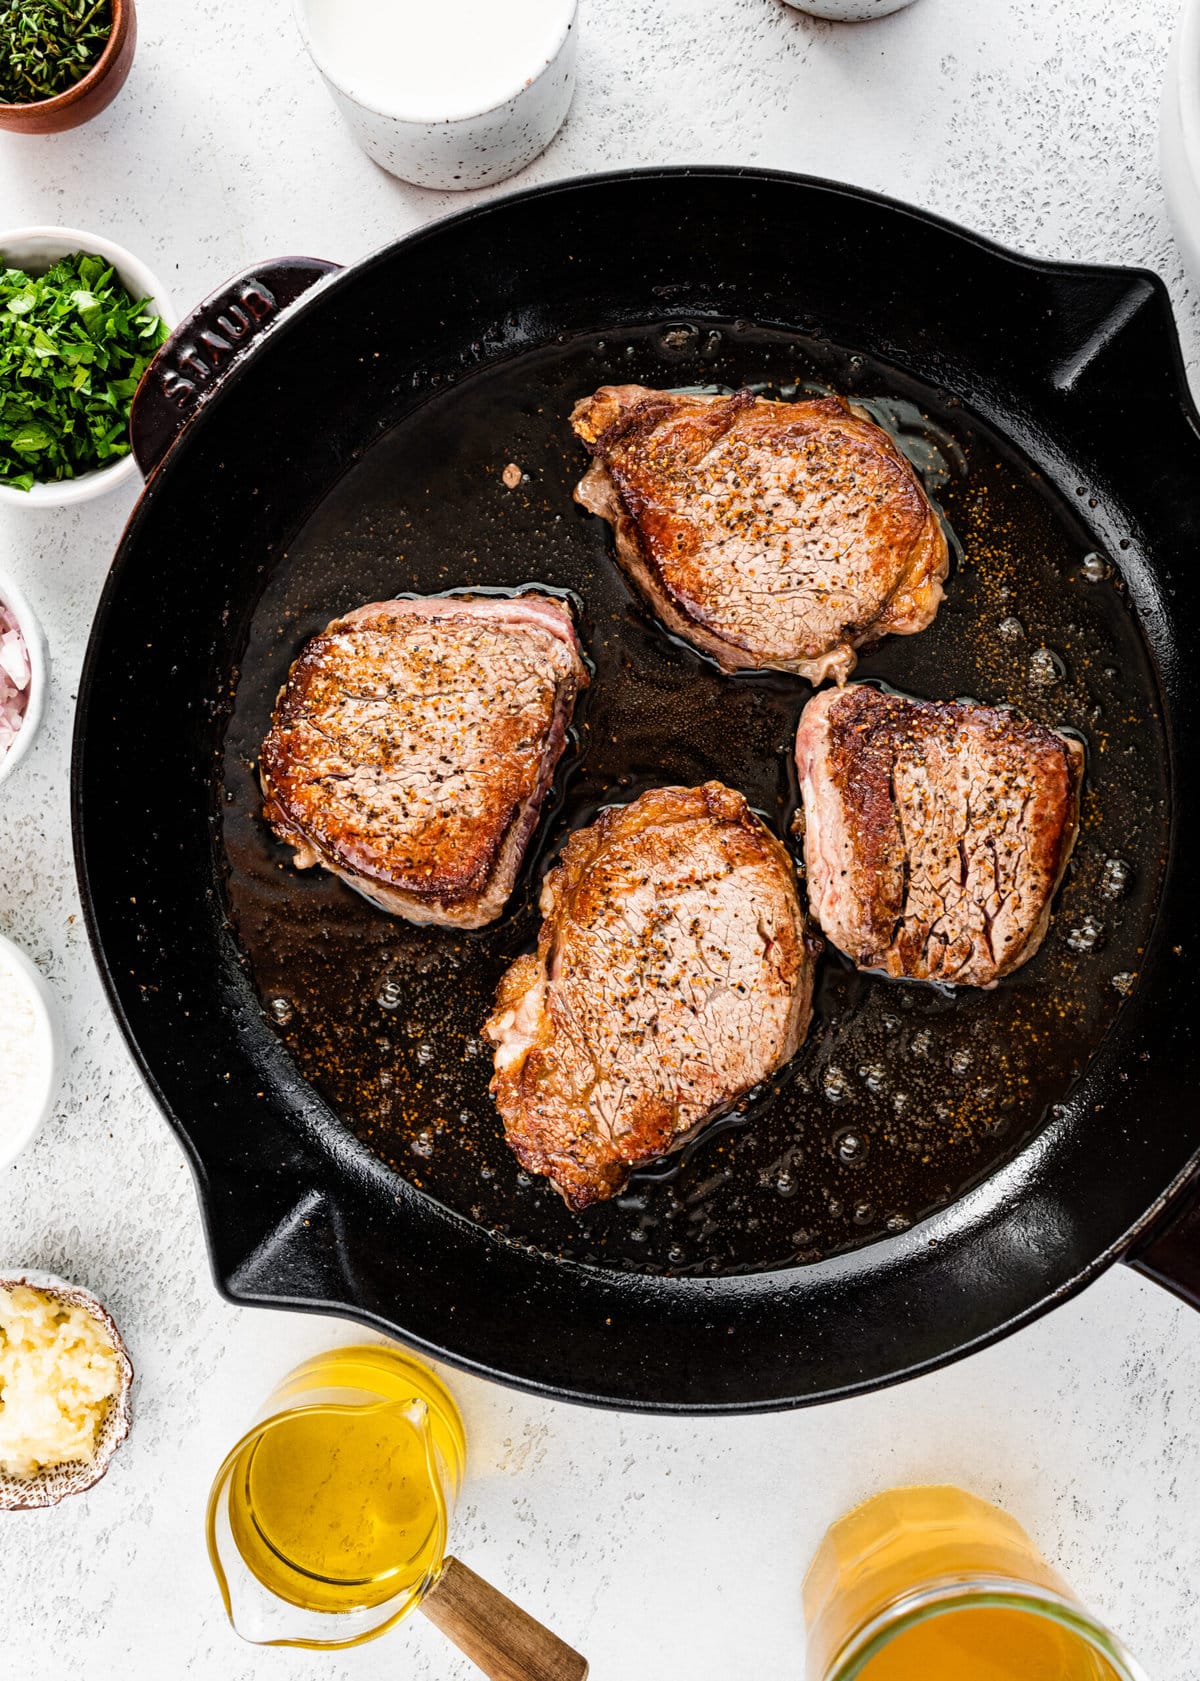 How to make best Steak Marsala recipe step-by-step: steak seared on both sides.